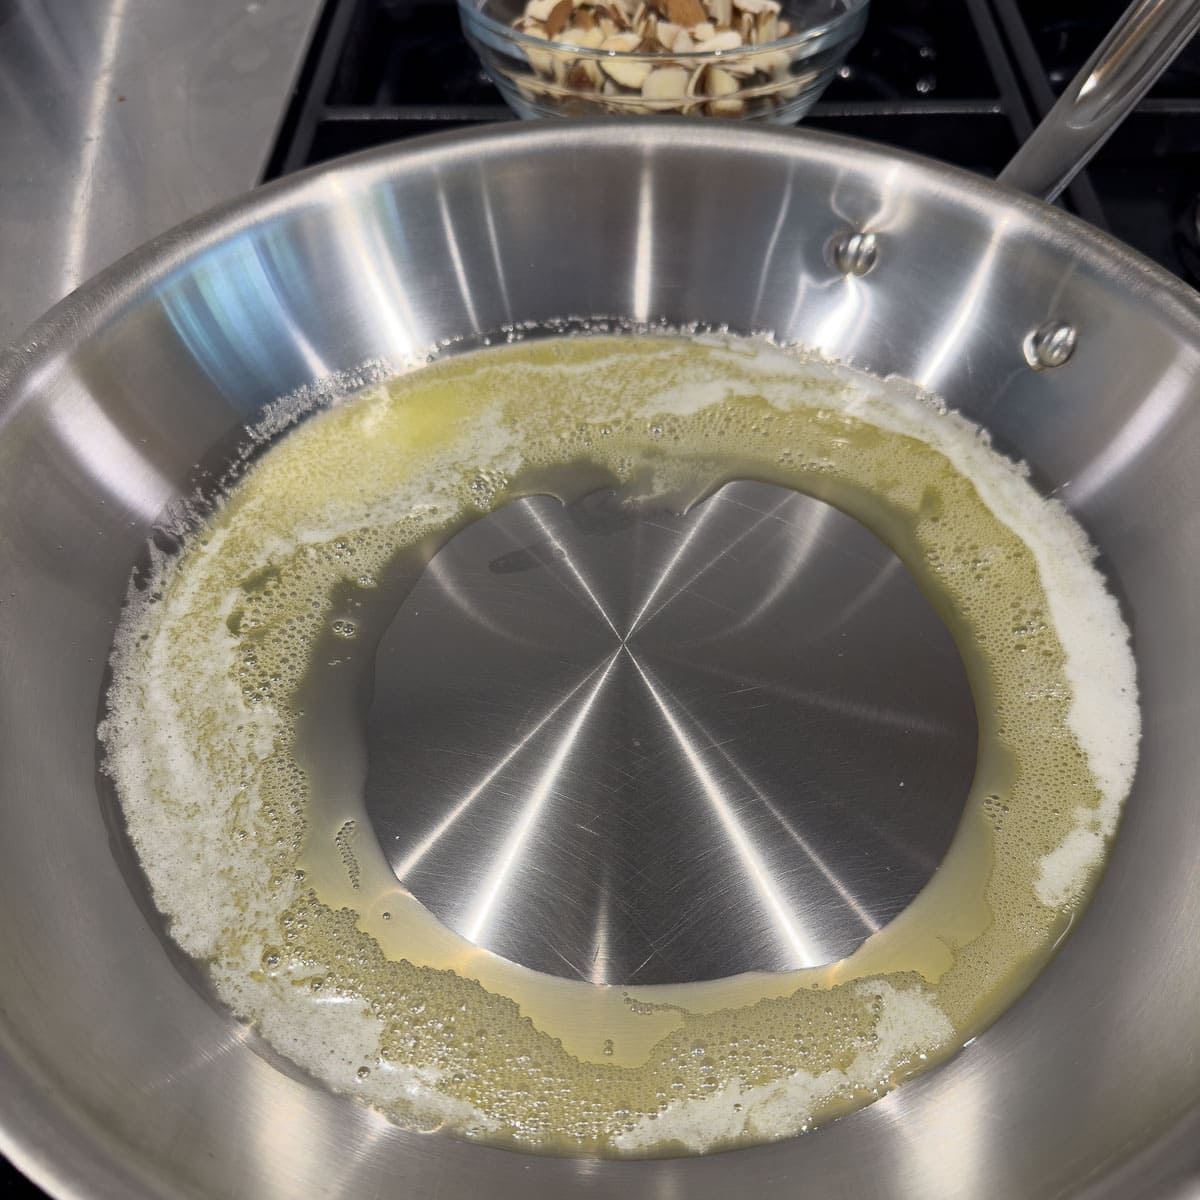 Melting butter in a stainless steel fry pan. 